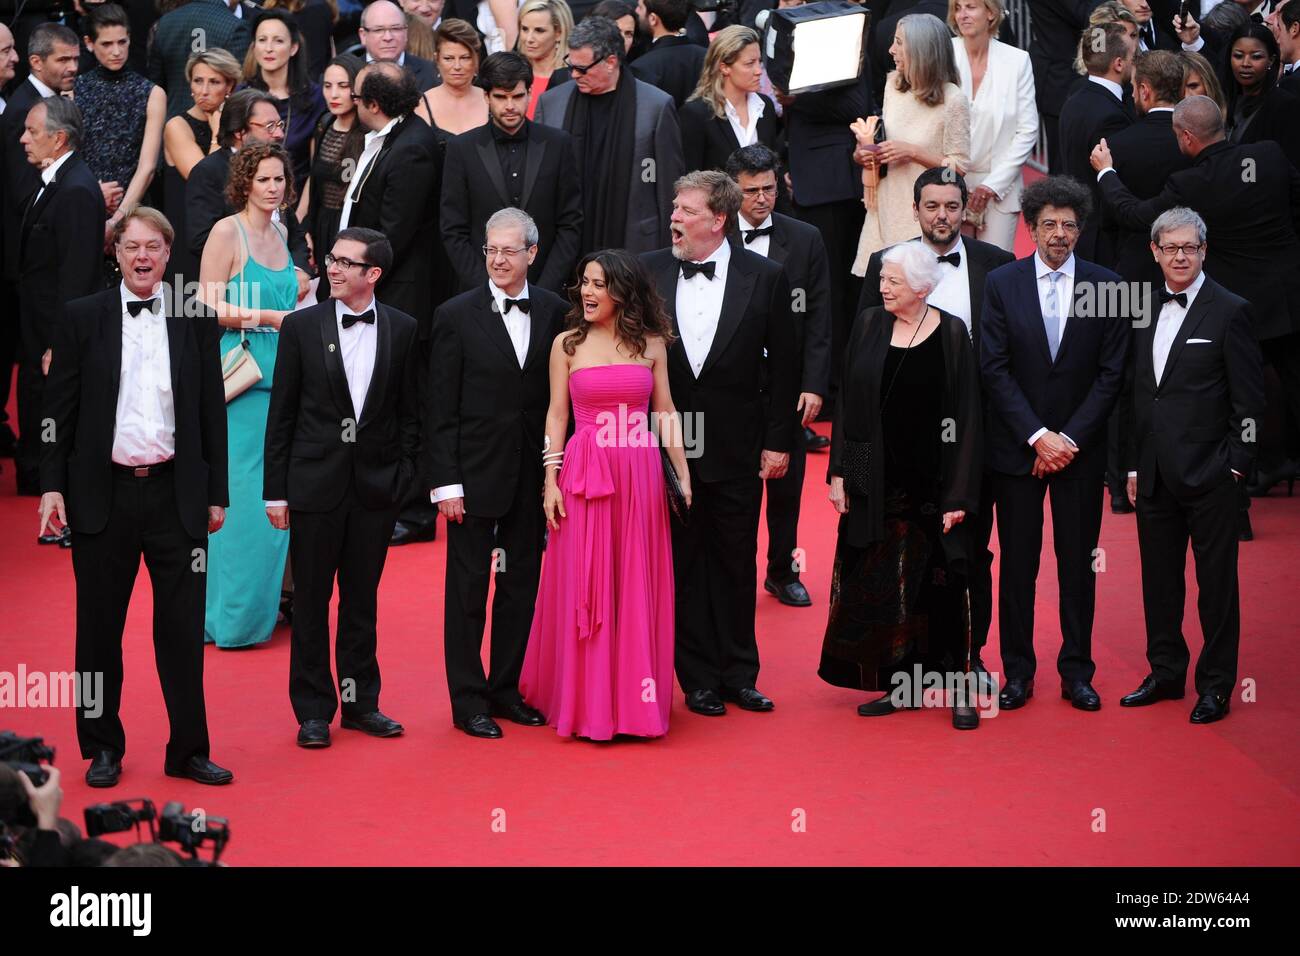 Salma Hayek, Roger Allers, Tomm Moore, Joan C Gratz, Joan Sfar, Bill Plympton, Paul Brizzi, Gaetan Brizzi arriving at Saint-Laurent screening held at the Palais Des Festivals in Cannes, France on May 17, 2014, as part of the 67th Cannes Film Festival. Photo by Aurore Marechal/ABACAPRESS.COM Stock Photo